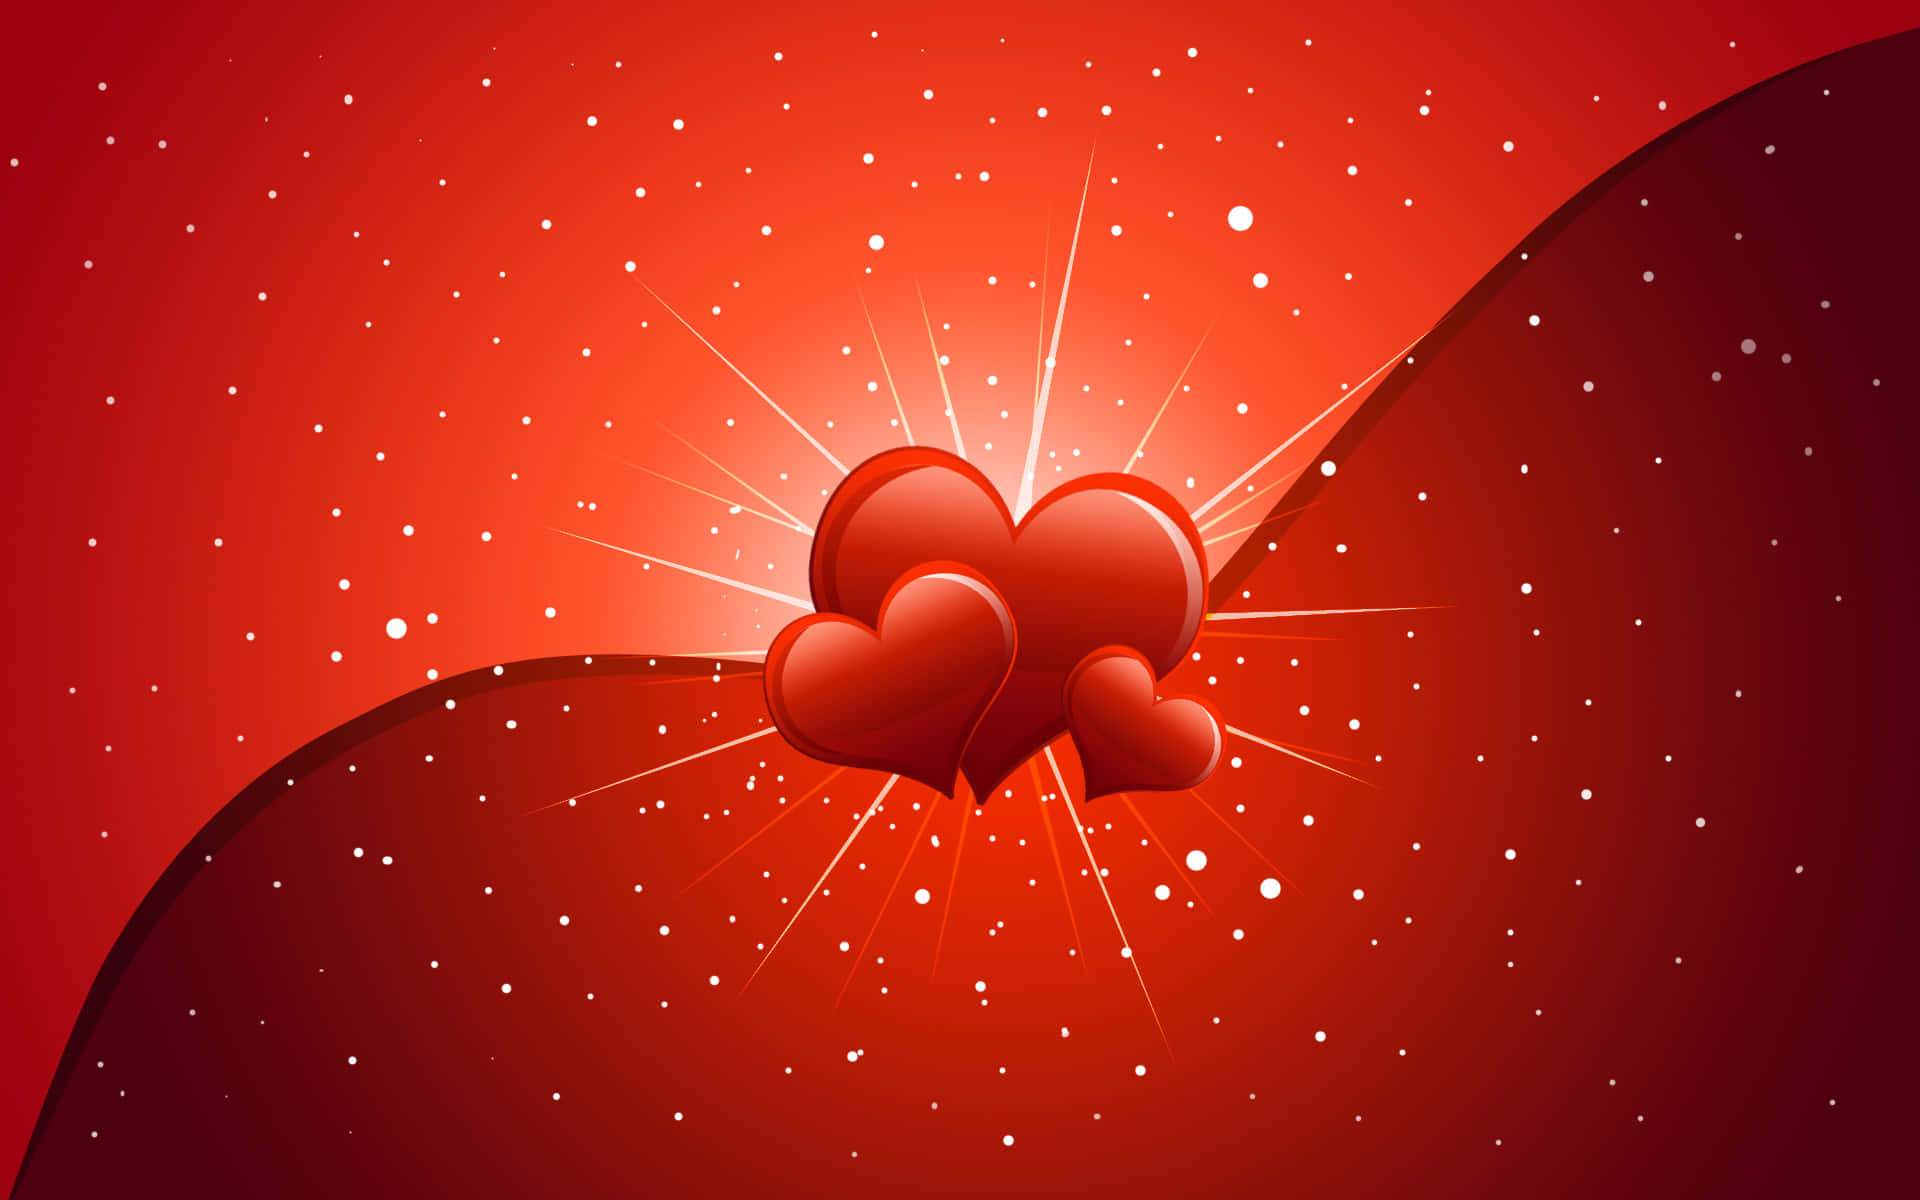 A Romantic High Resolution Valentines Day background